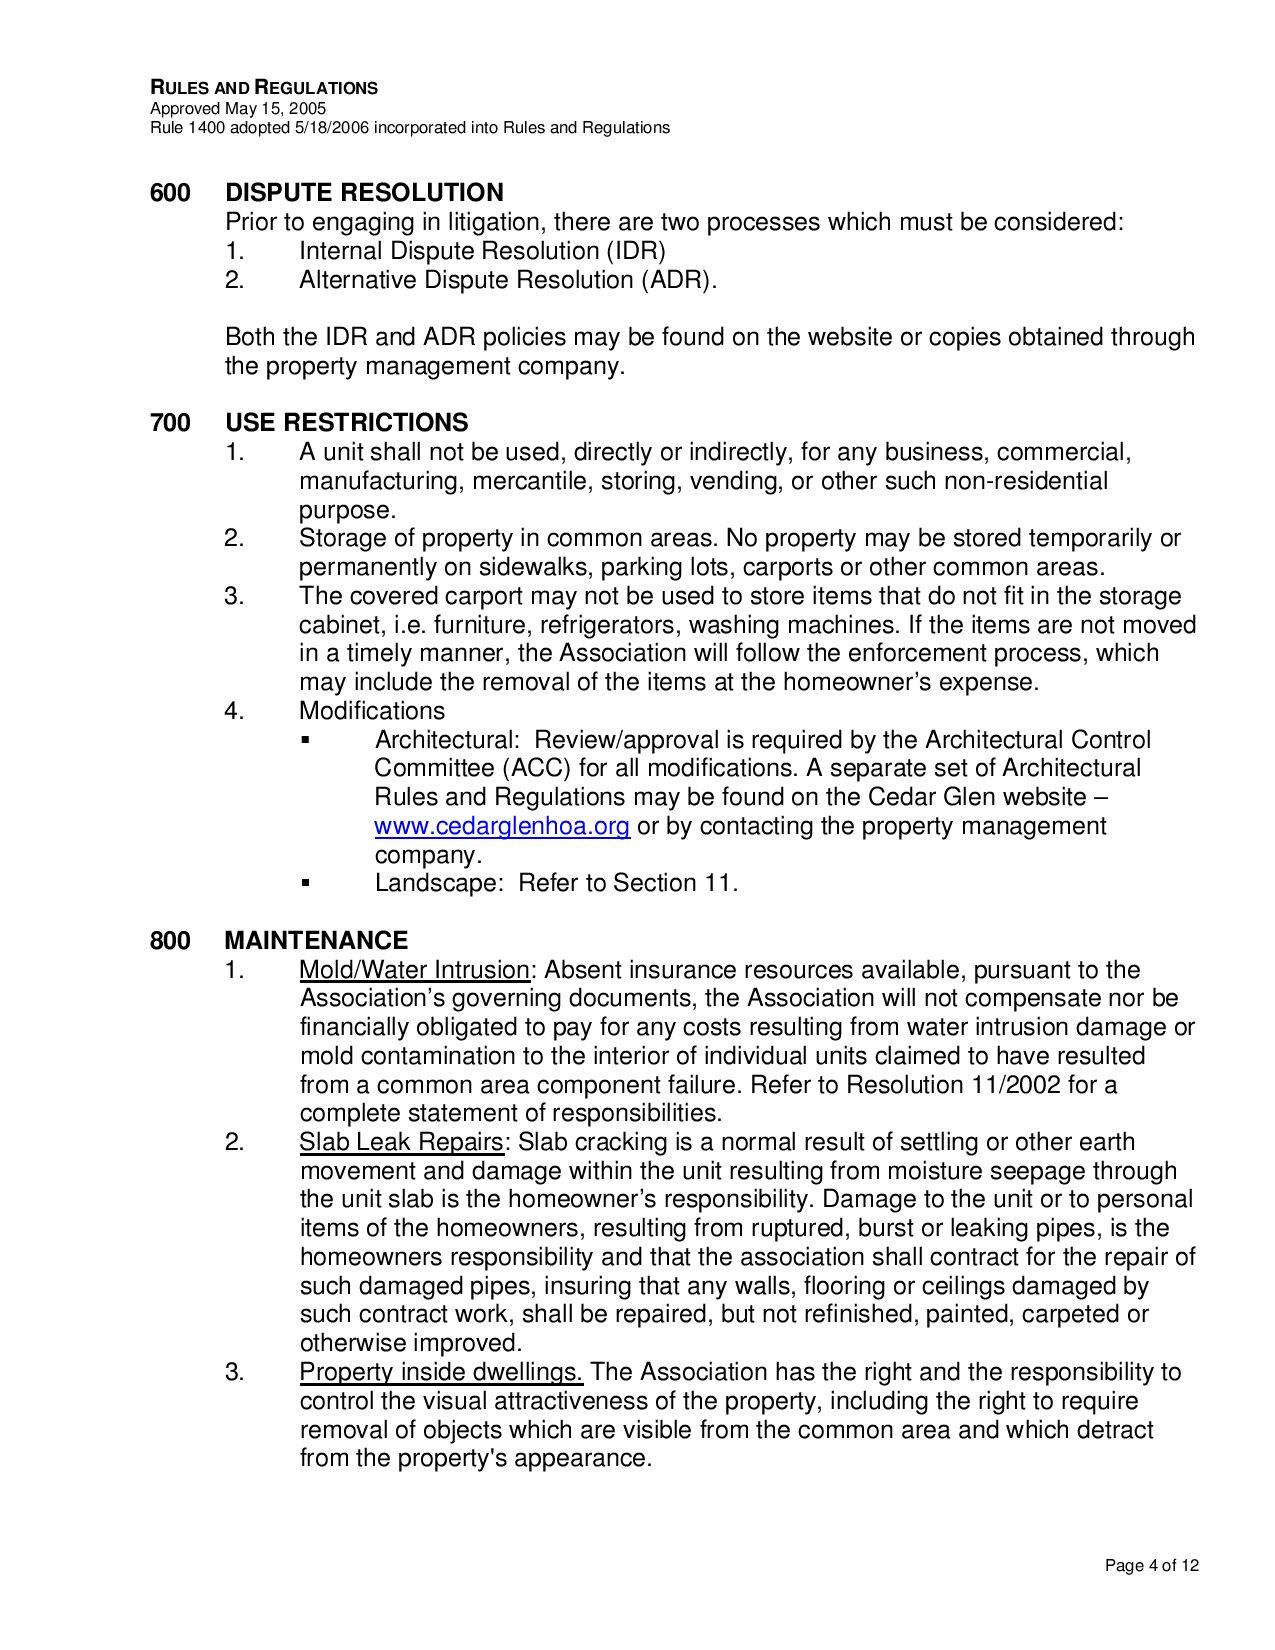 Page 4 of the HOA Rules and Regulations